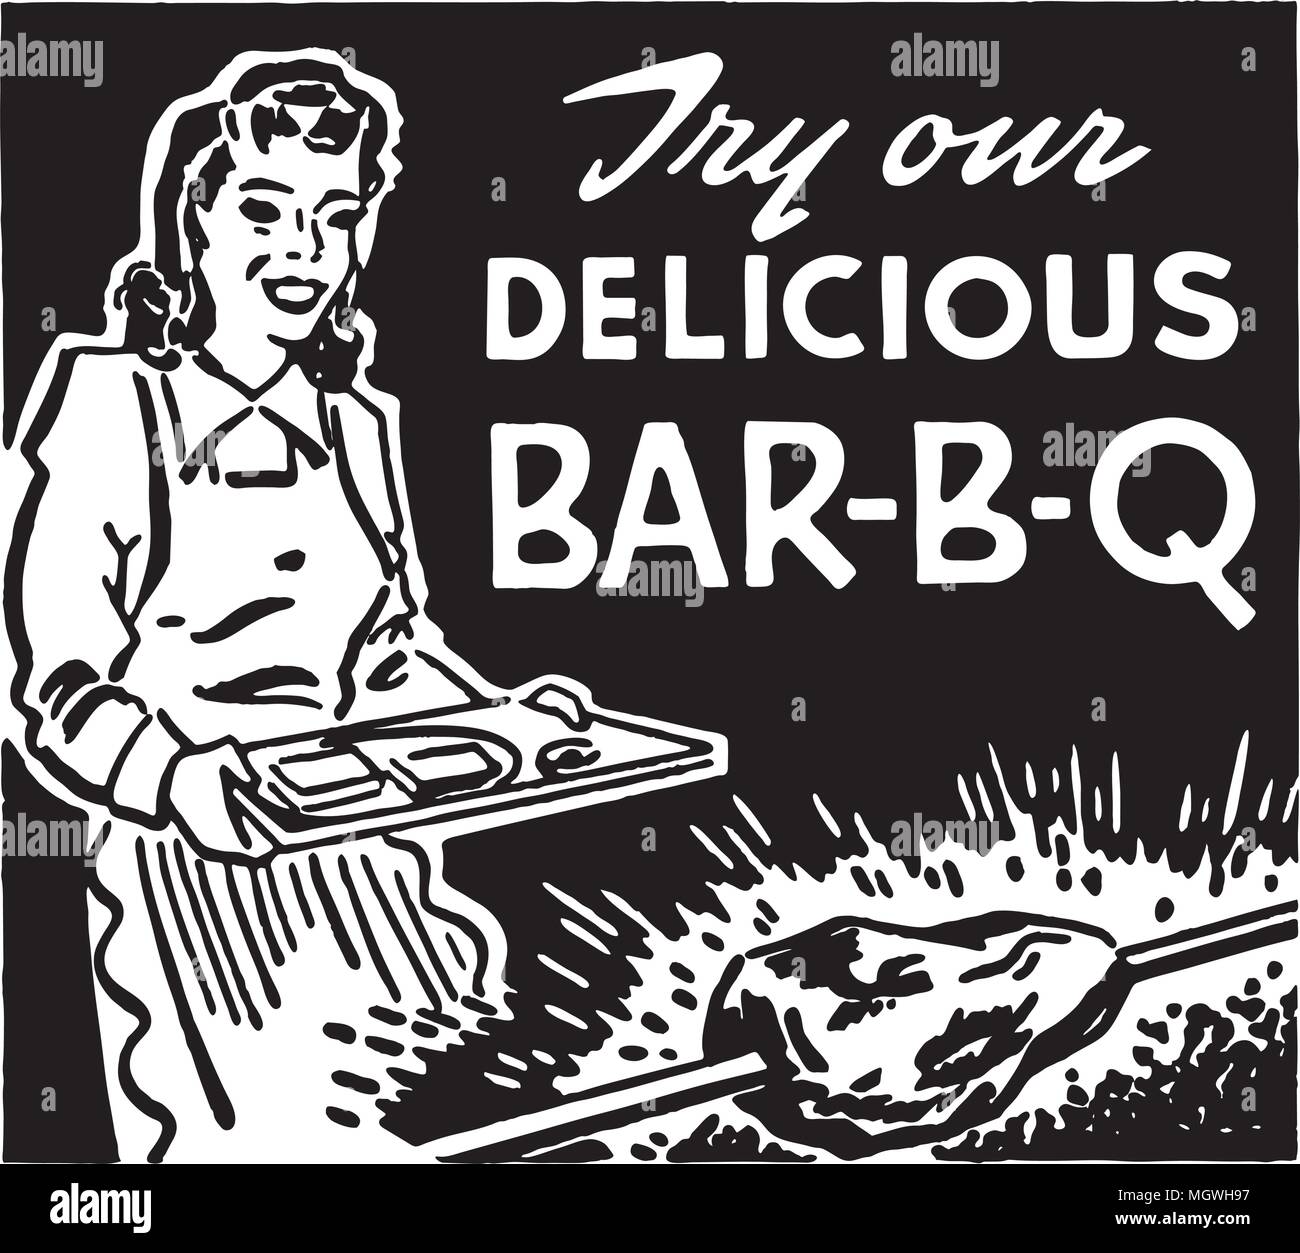 Try Our Delicious Bar-B-Q - Retro Ad Art Banner Stock Vector